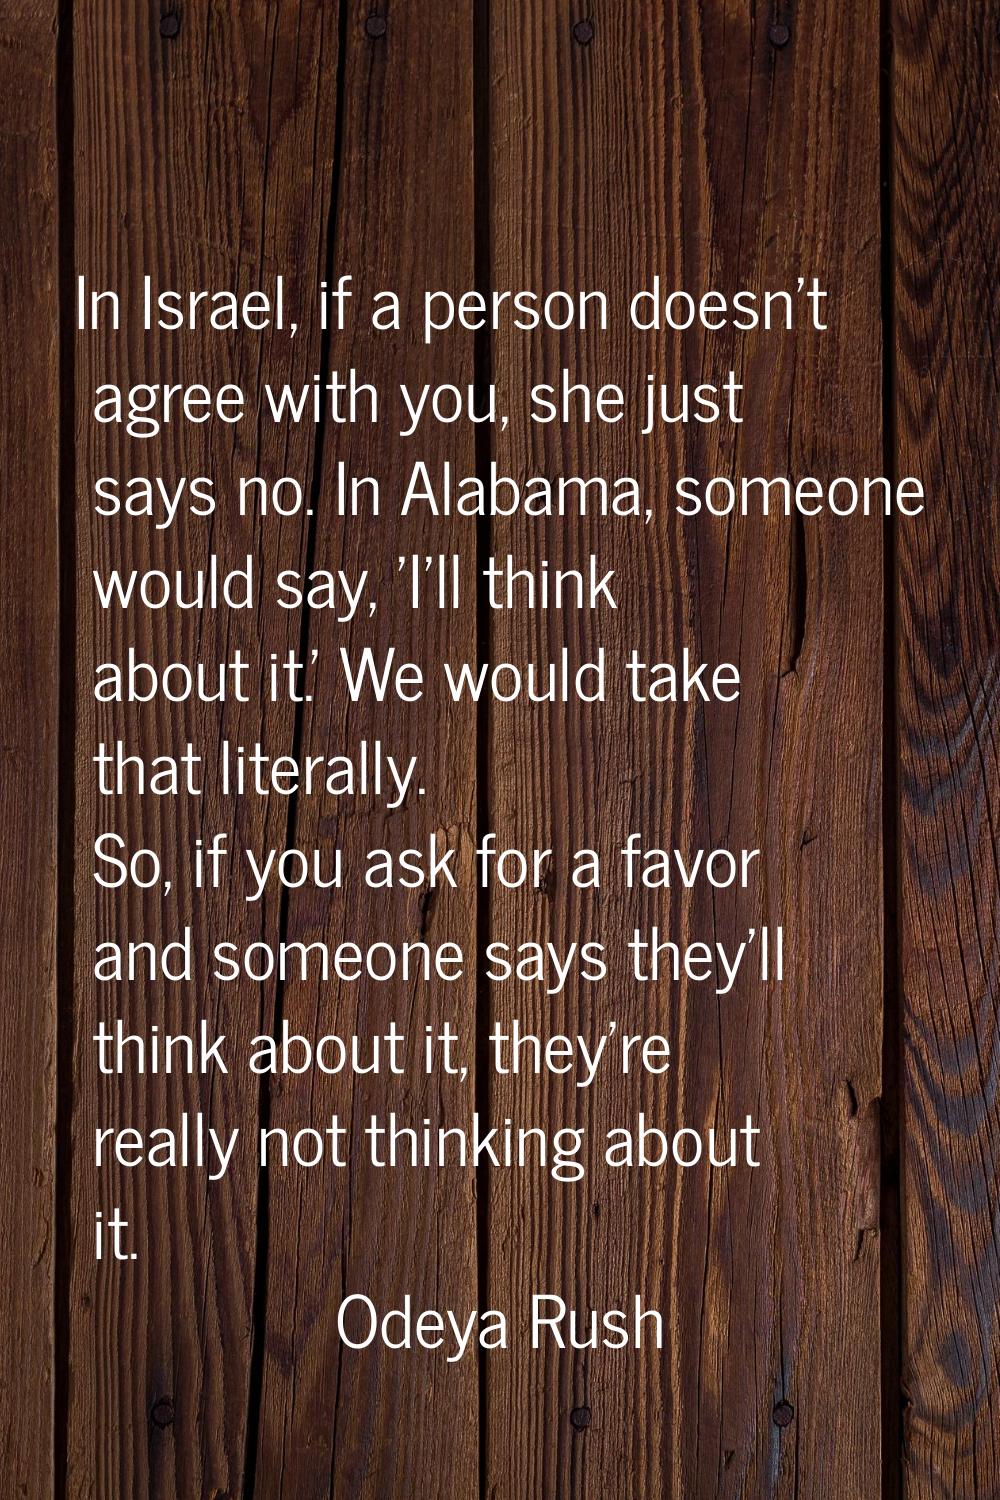 In Israel, if a person doesn't agree with you, she just says no. In Alabama, someone would say, 'I'